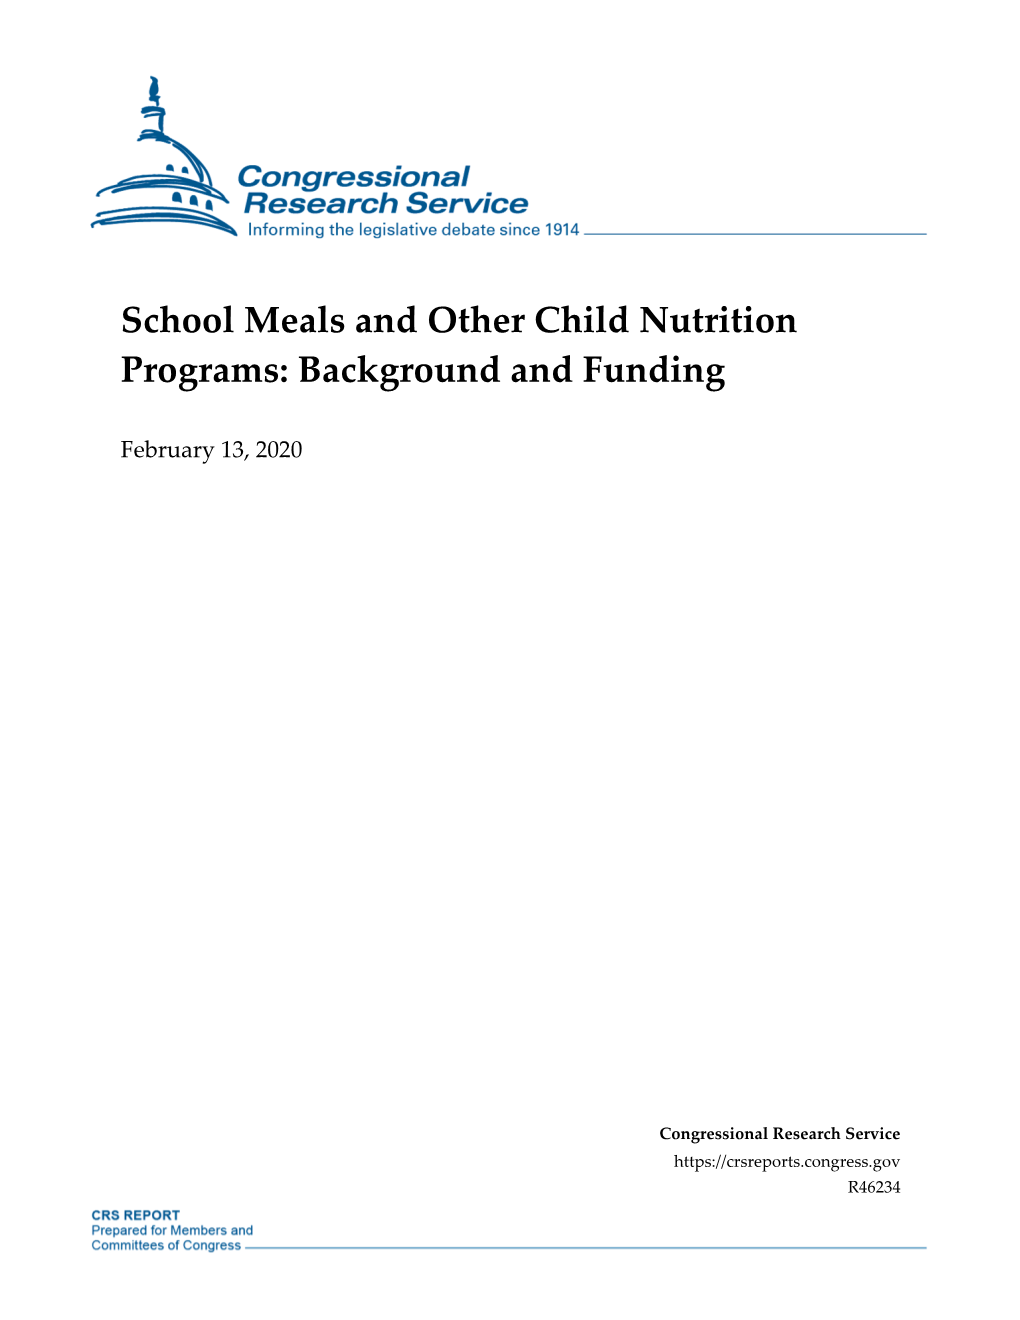 School Meals and Other Child Nutrition Programs: Background and Funding